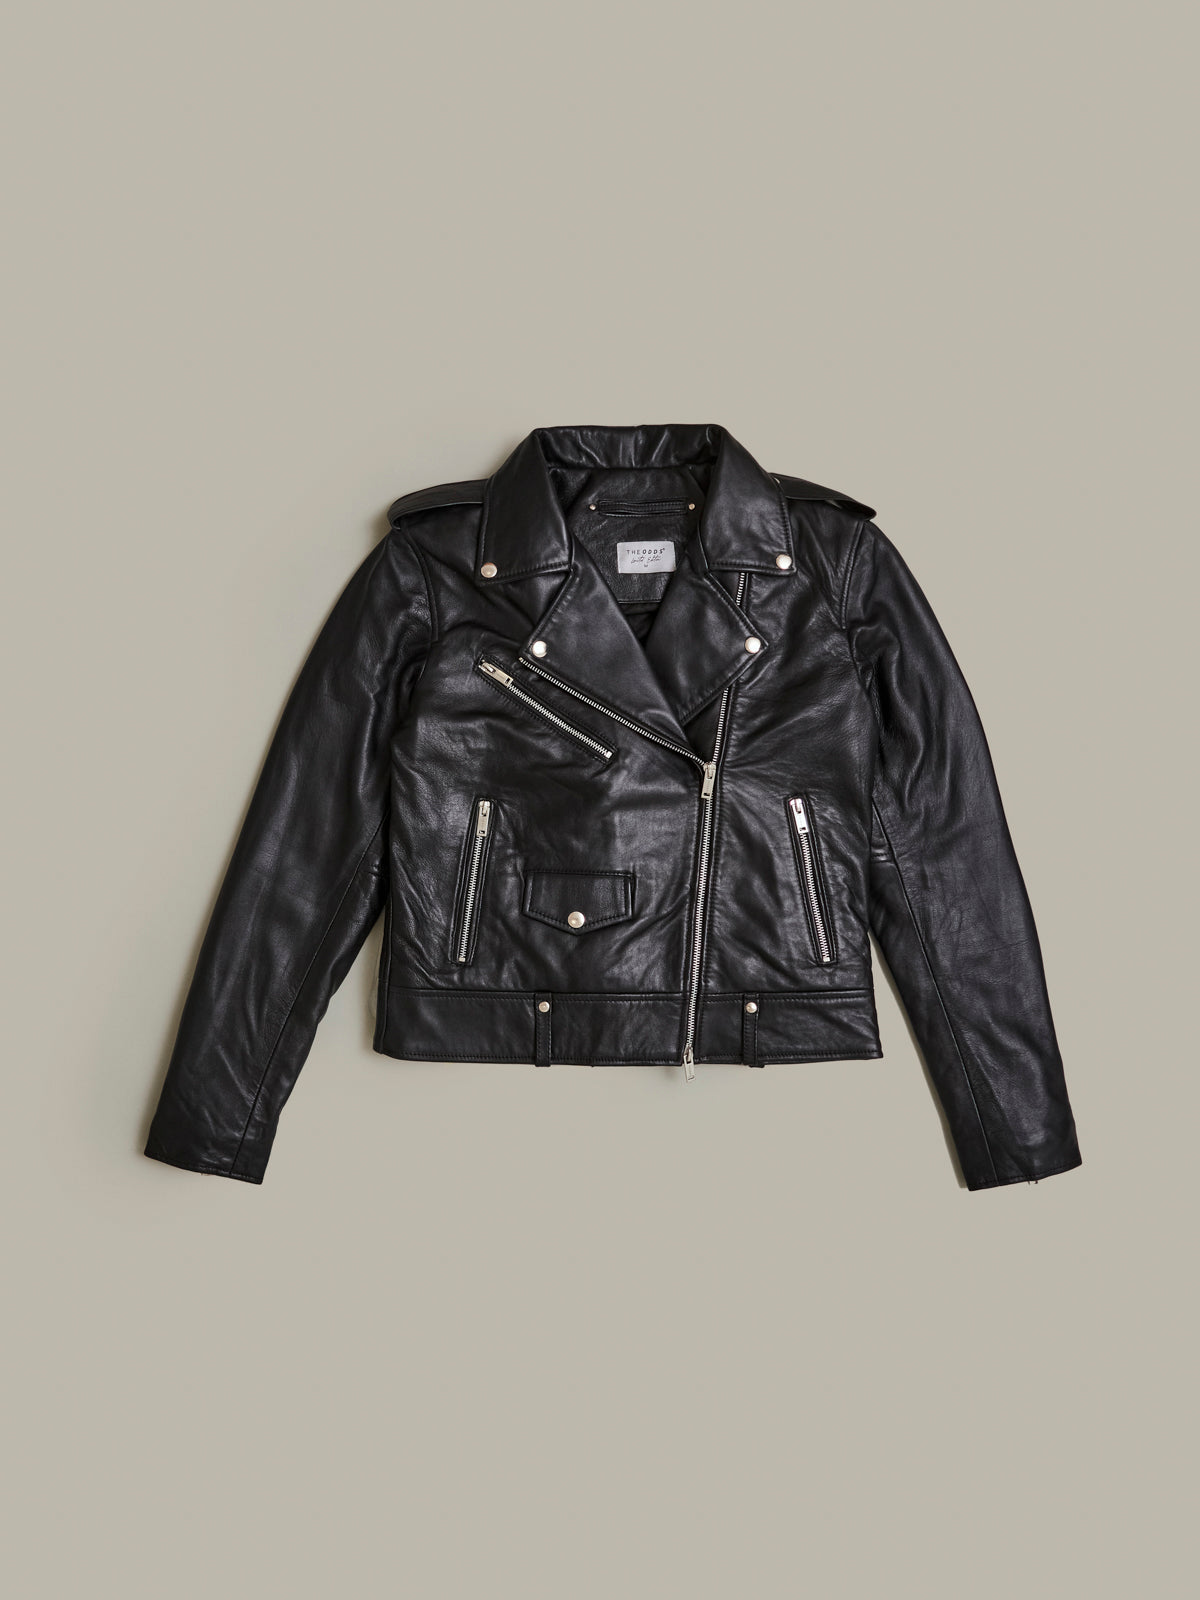 Carbon Gloss Leather Jacket Women/ LMTD Edition